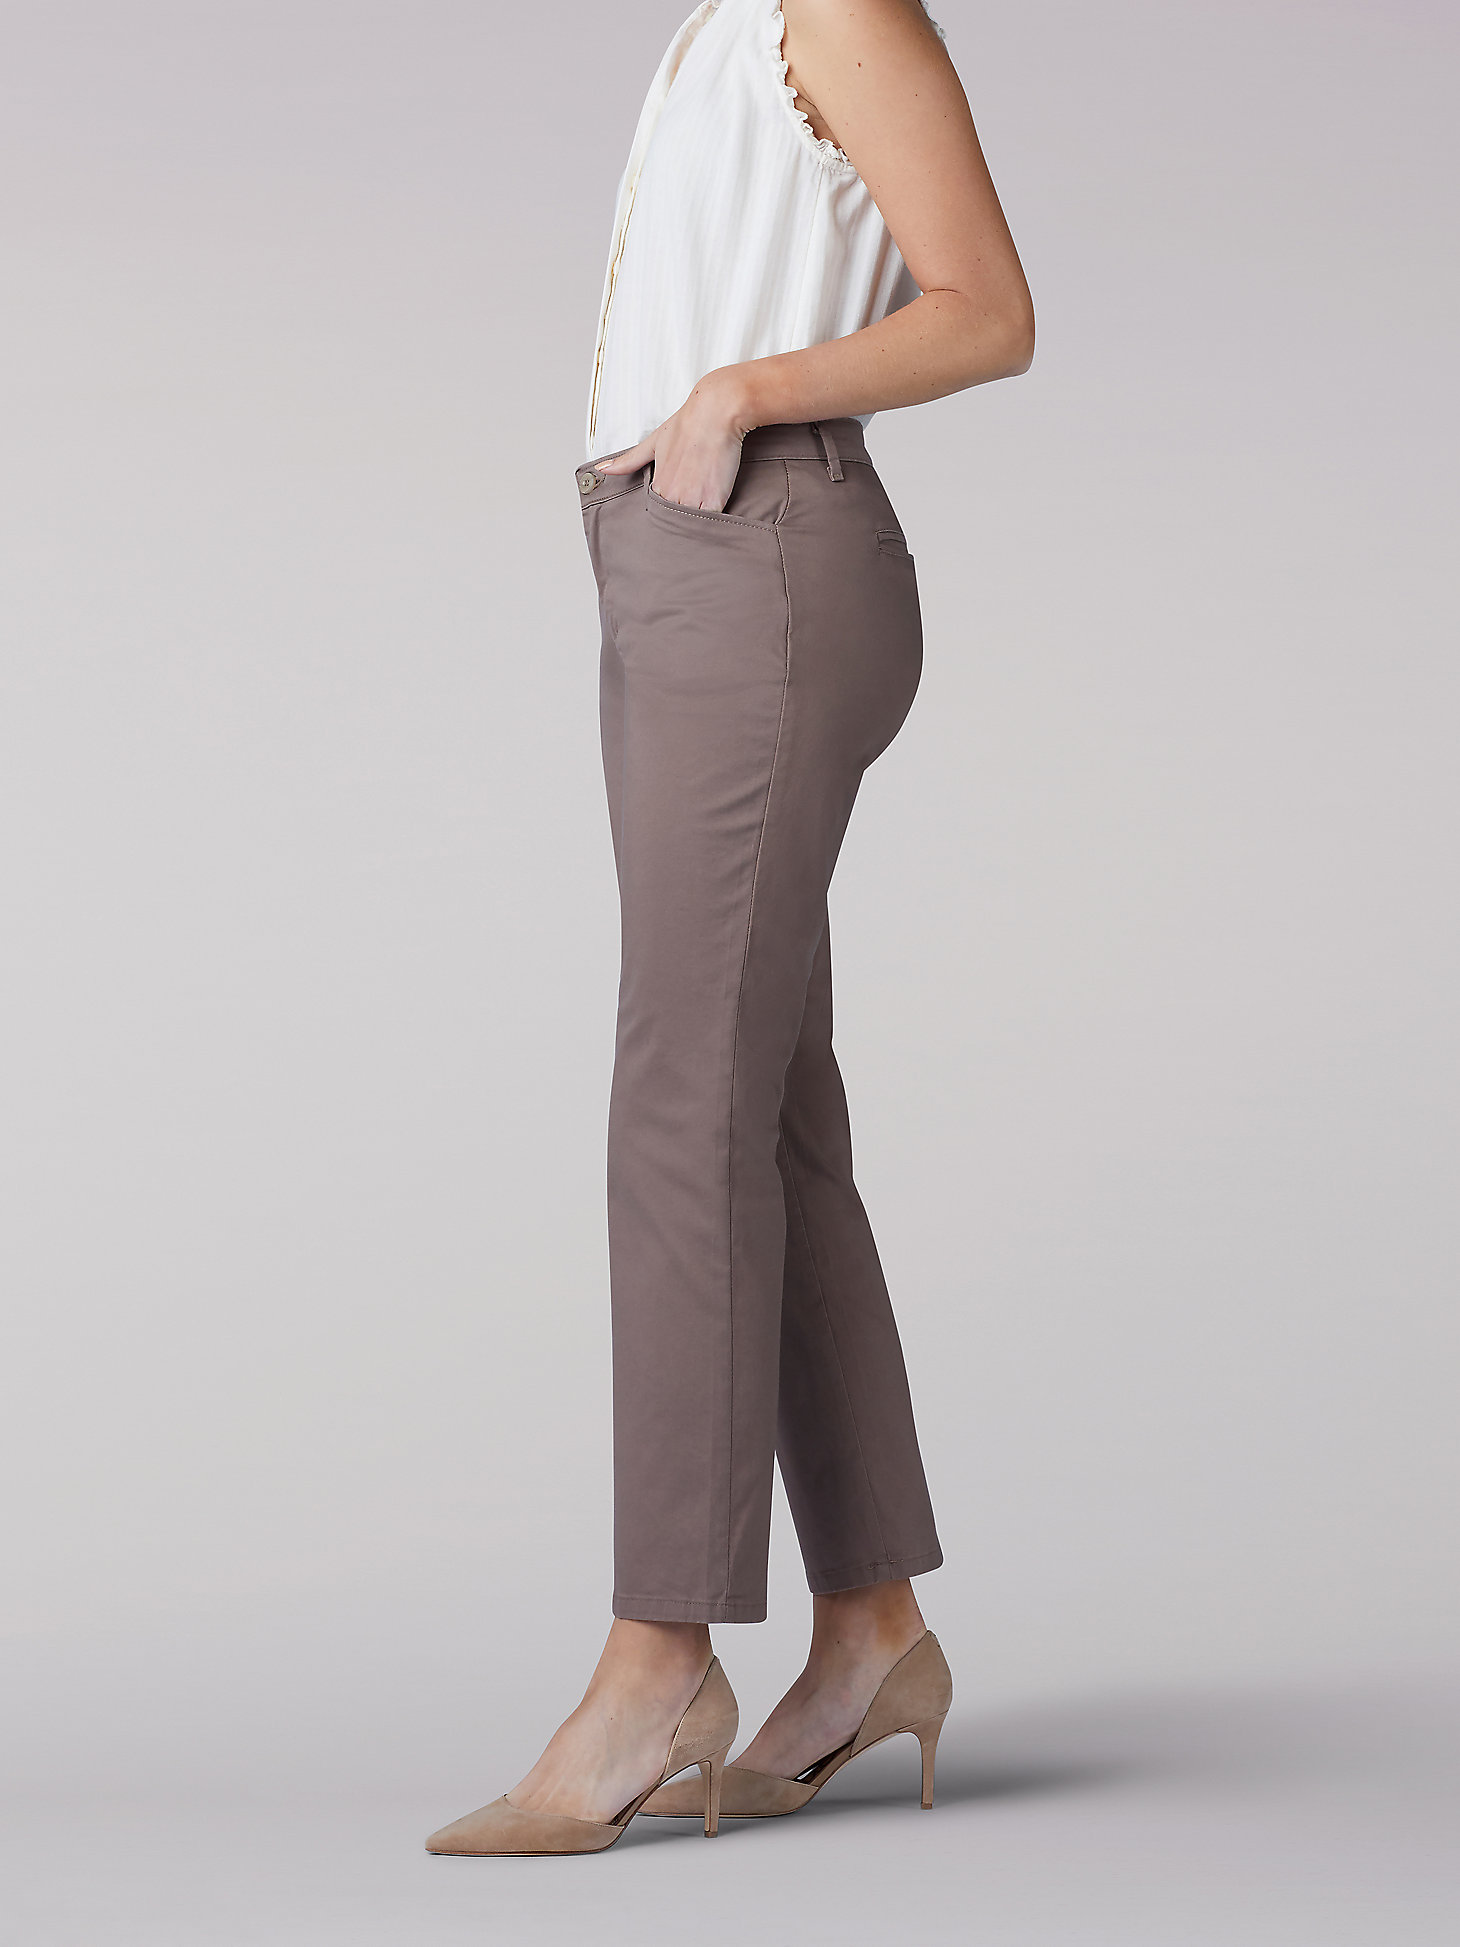 Lee Womens Petite Petite Relaxed Fit All Day Pant